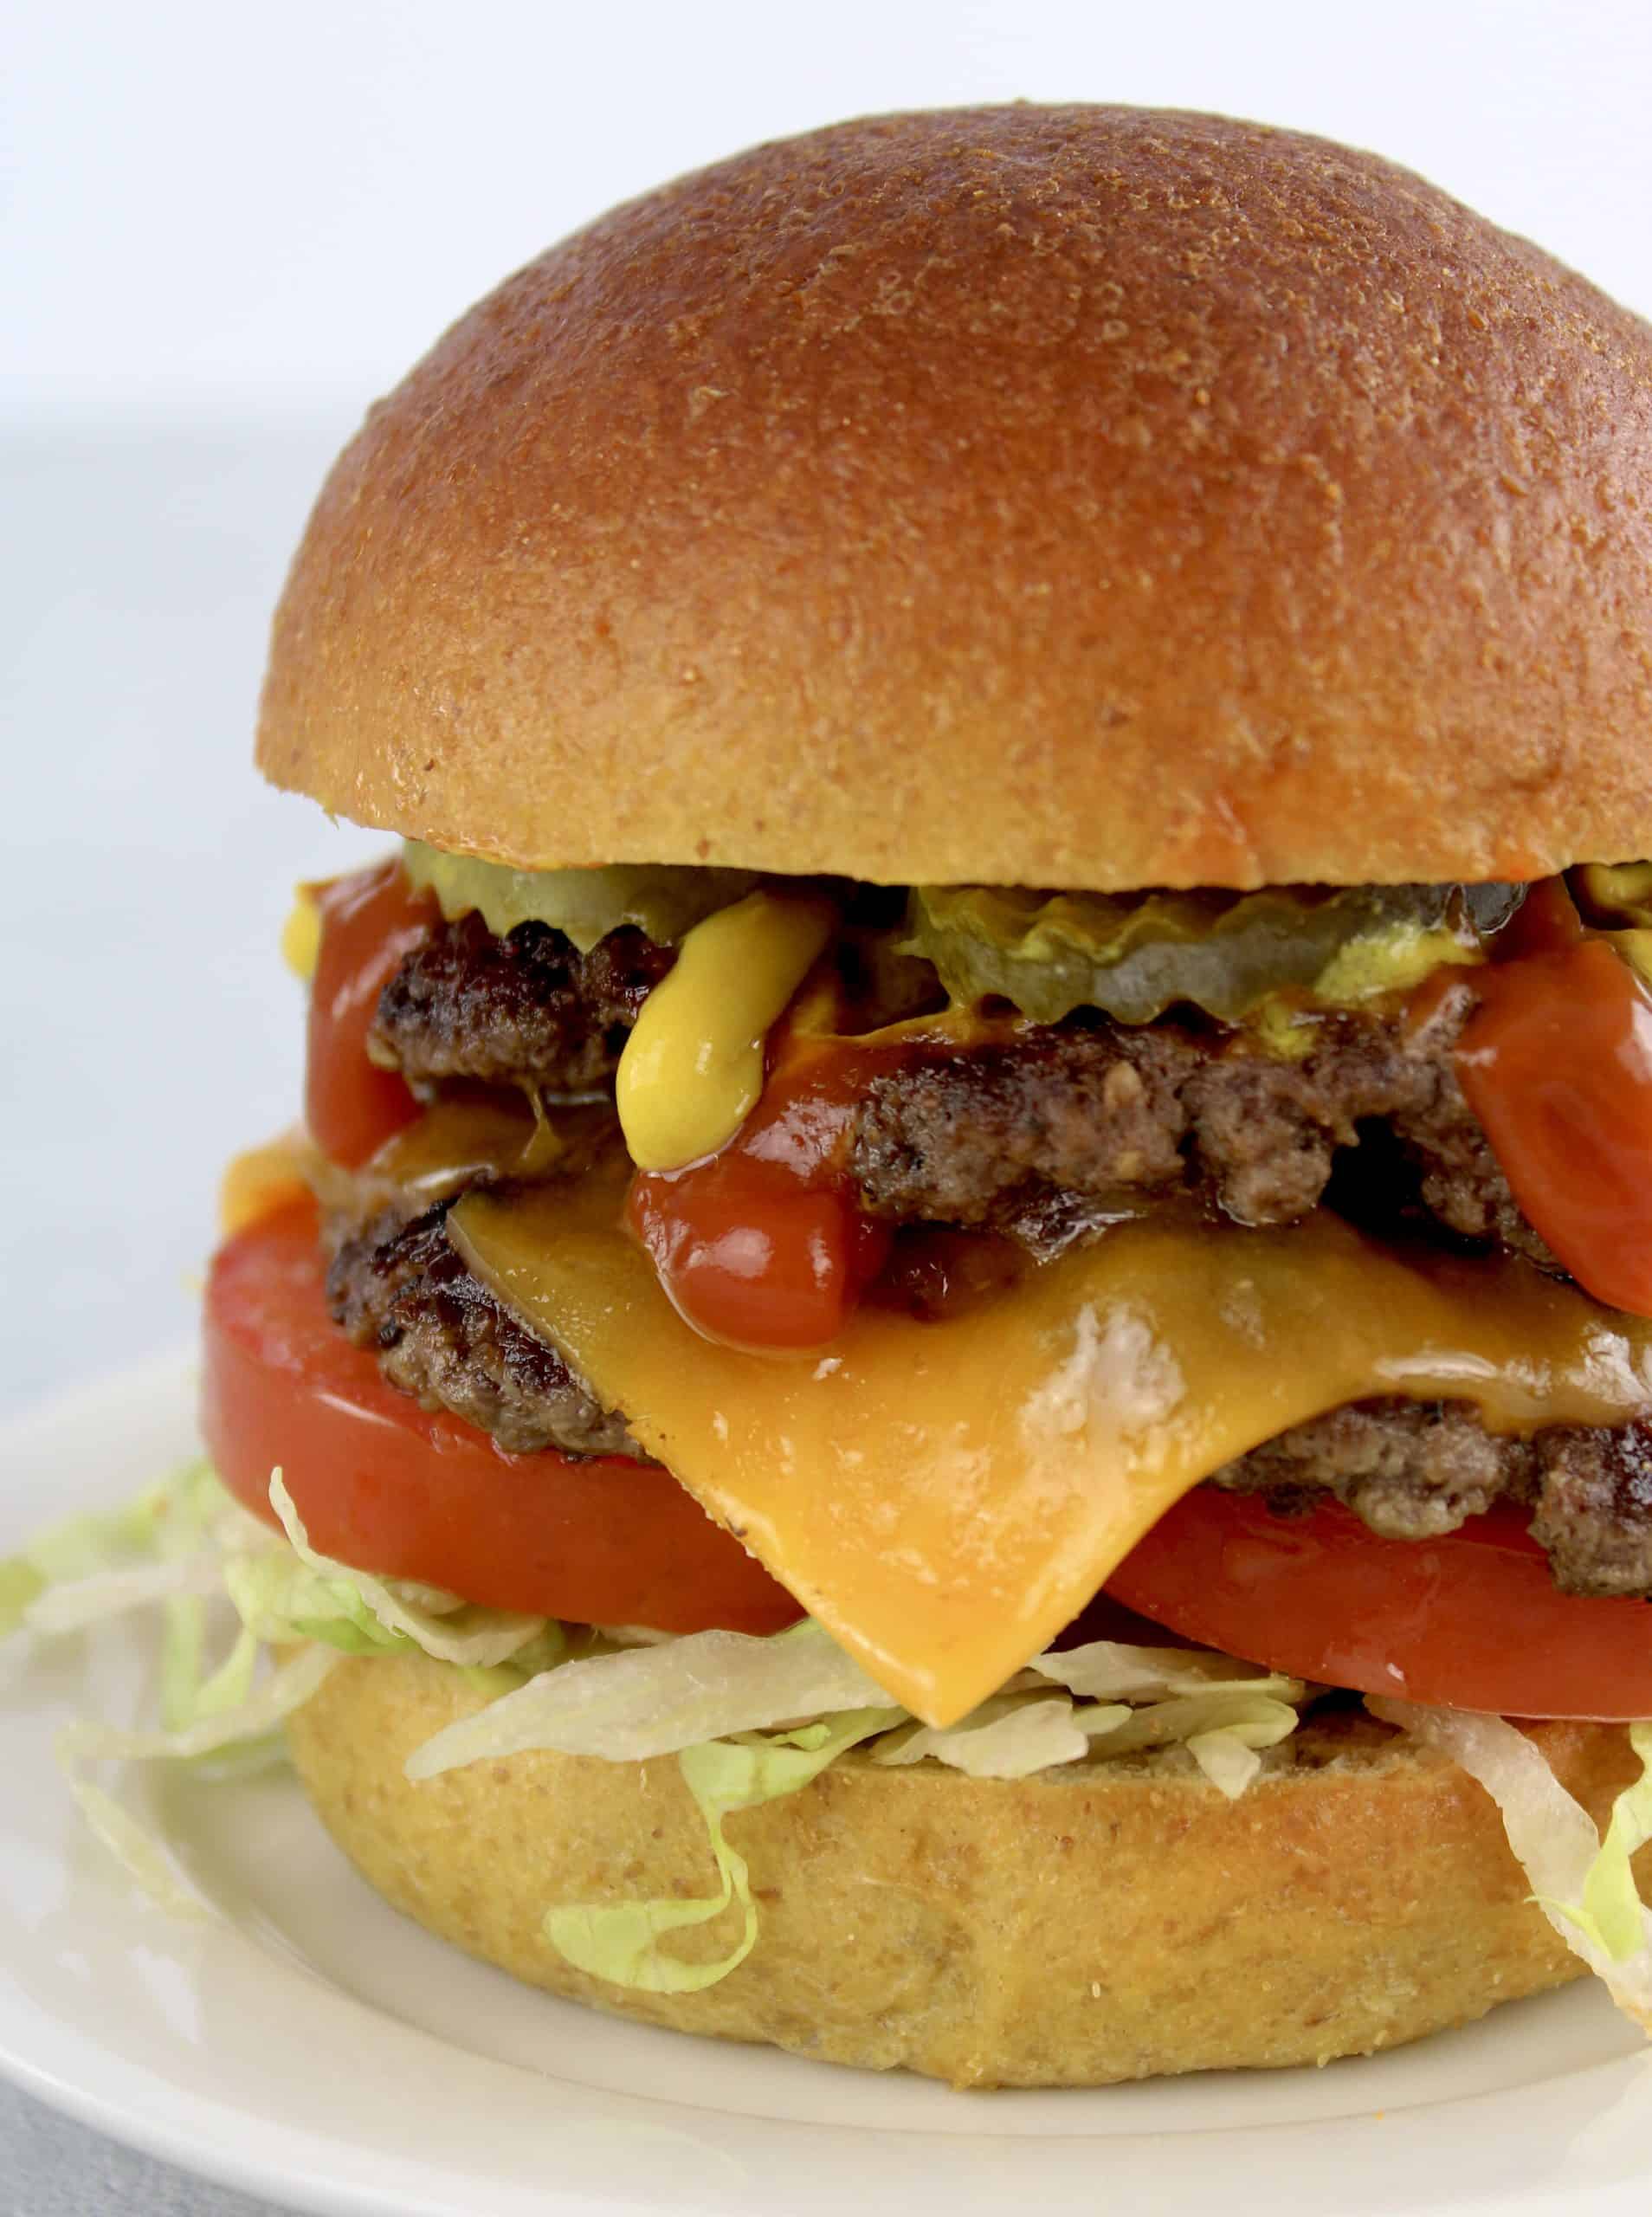 12 Tips For Making The Ultimate Smash Burger